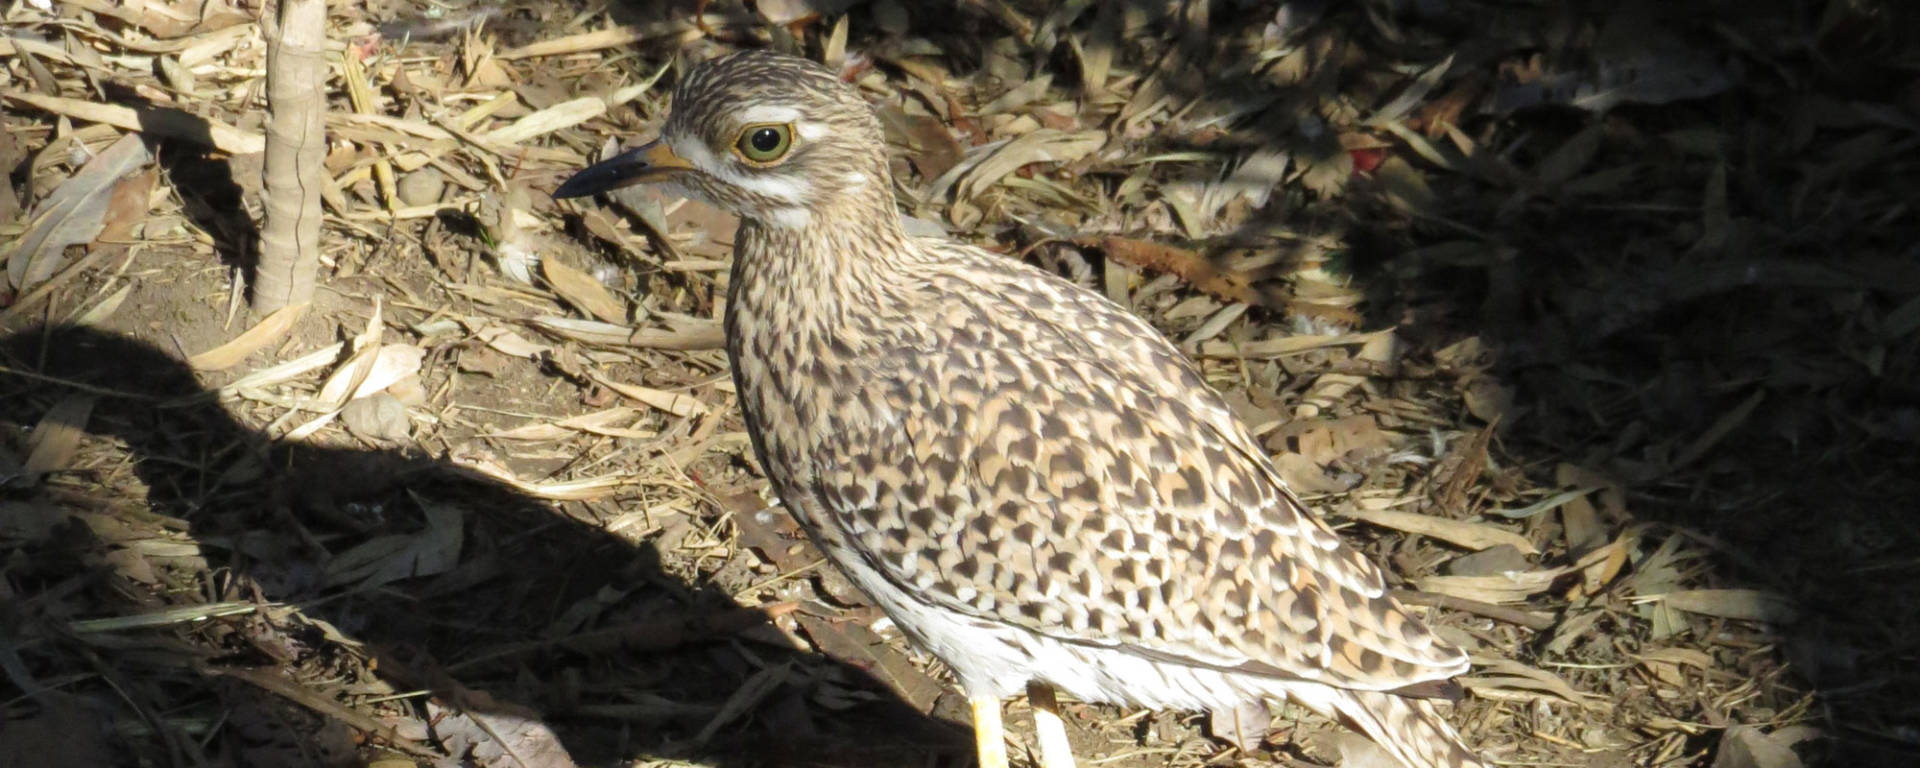 Cape Thick-knee by Cheryl Crowley